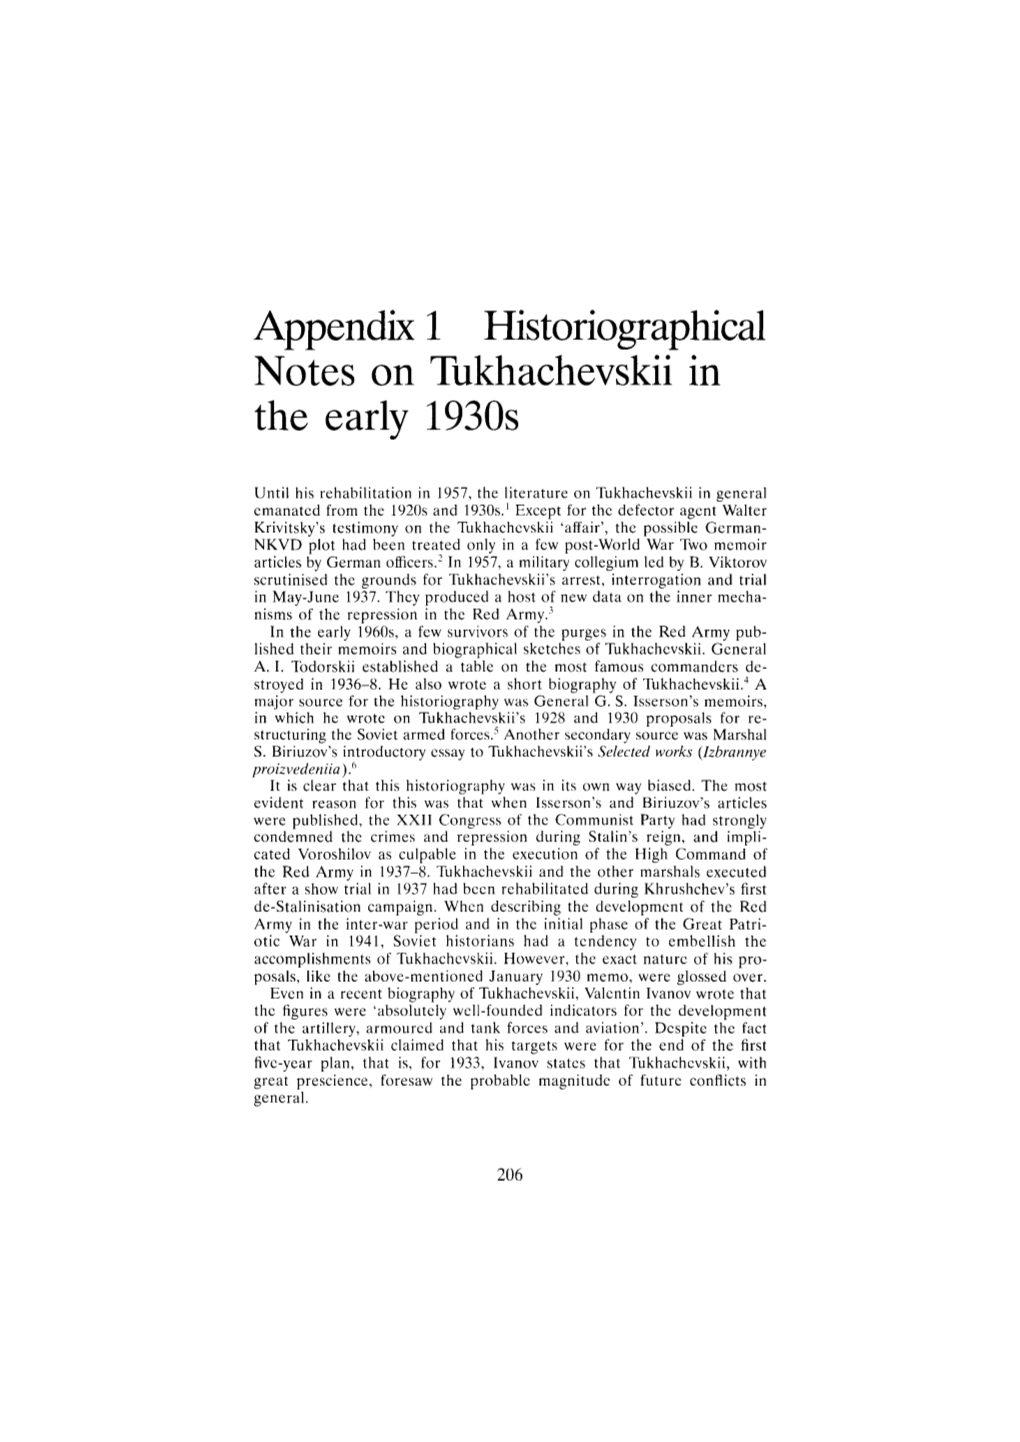 Appendix 1 Historiographical Notes on Tukhachevskii in the Early 1930S